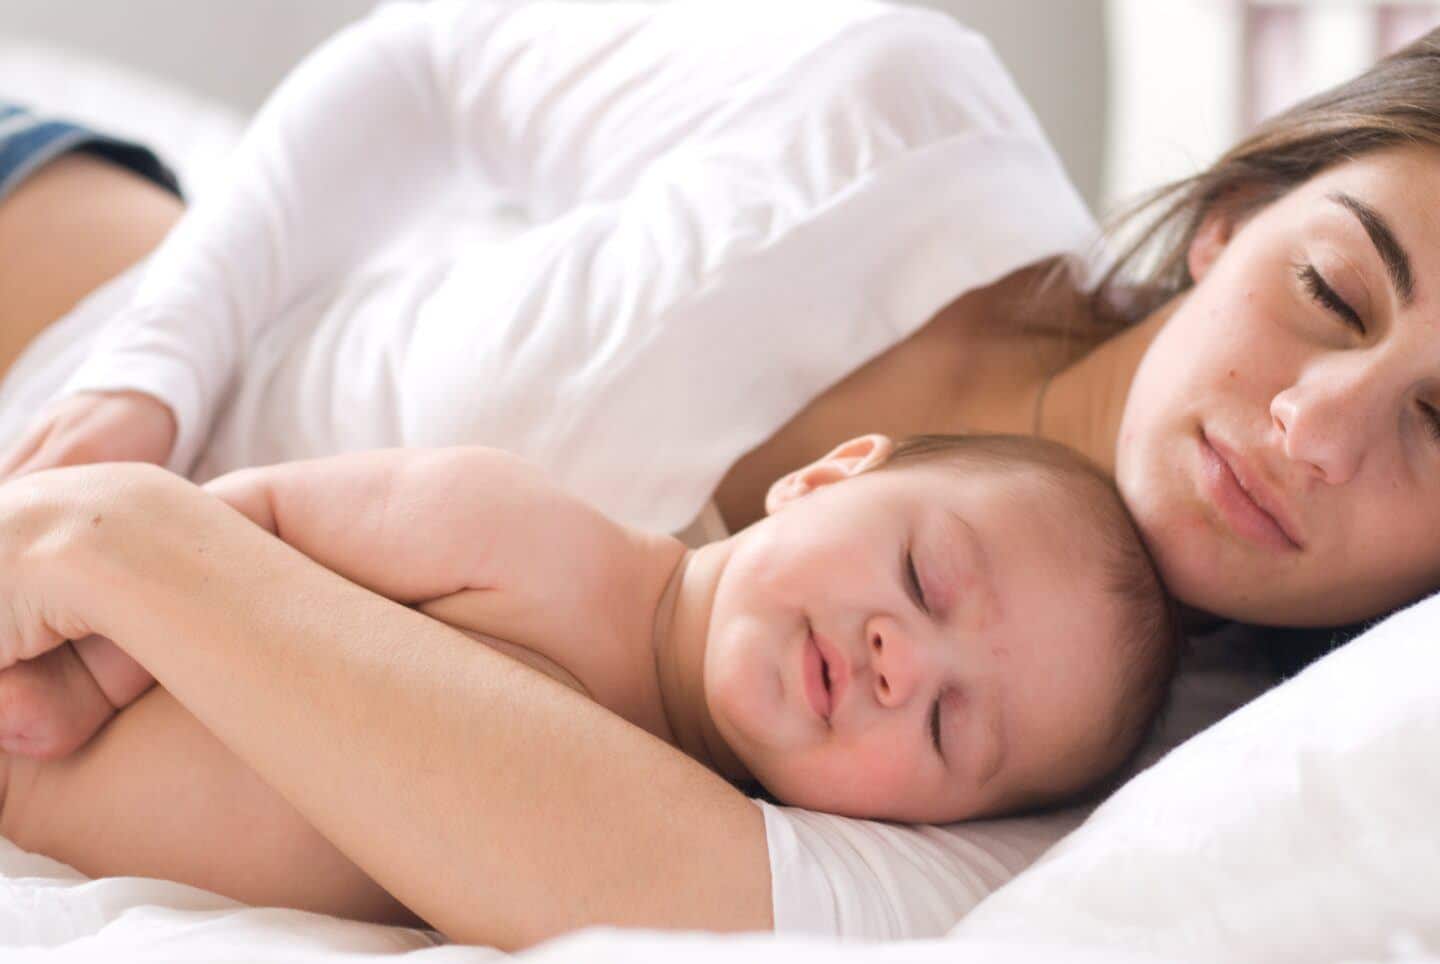 mom and baby co-sleeping together in bed